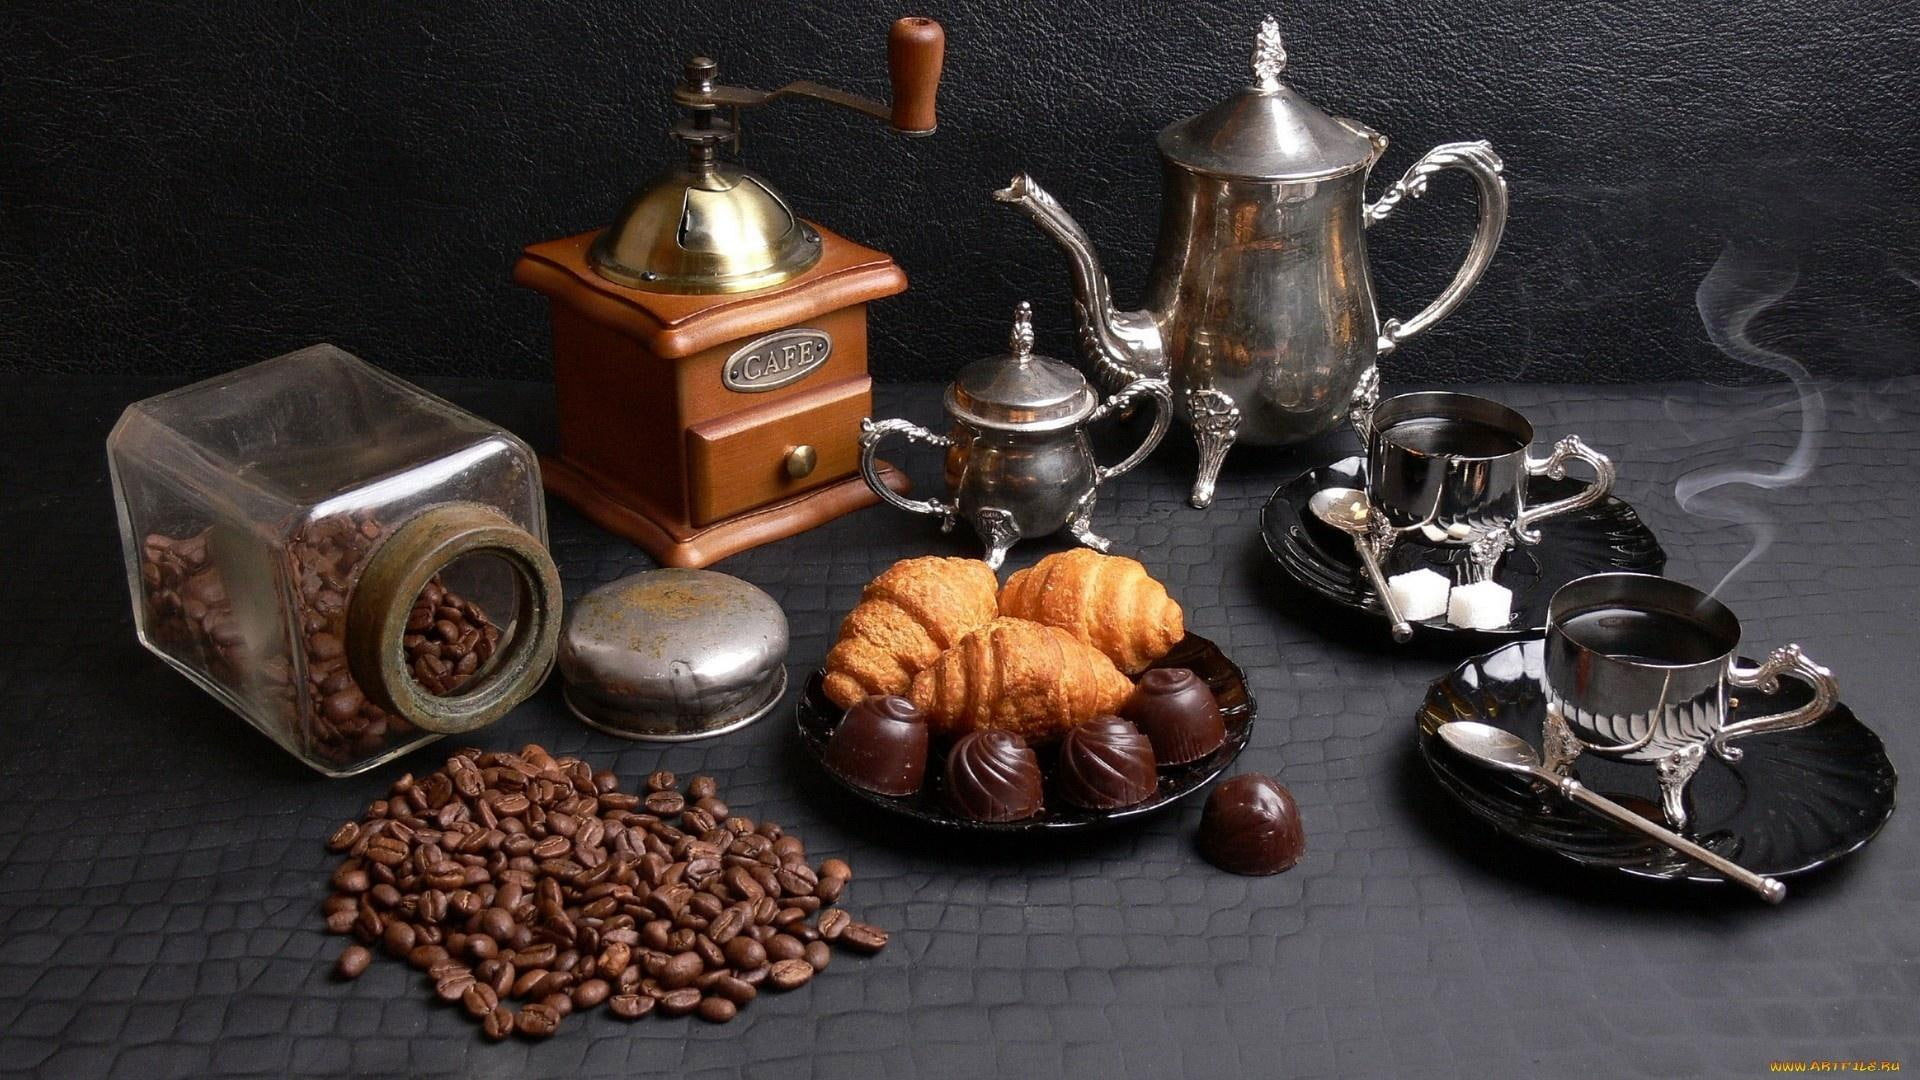 Coffee wallpaper, stainless steel tea set, coffee grinder, and coffee beans • Wallpaper For You HD Wallpaper For Desktop & Mobile